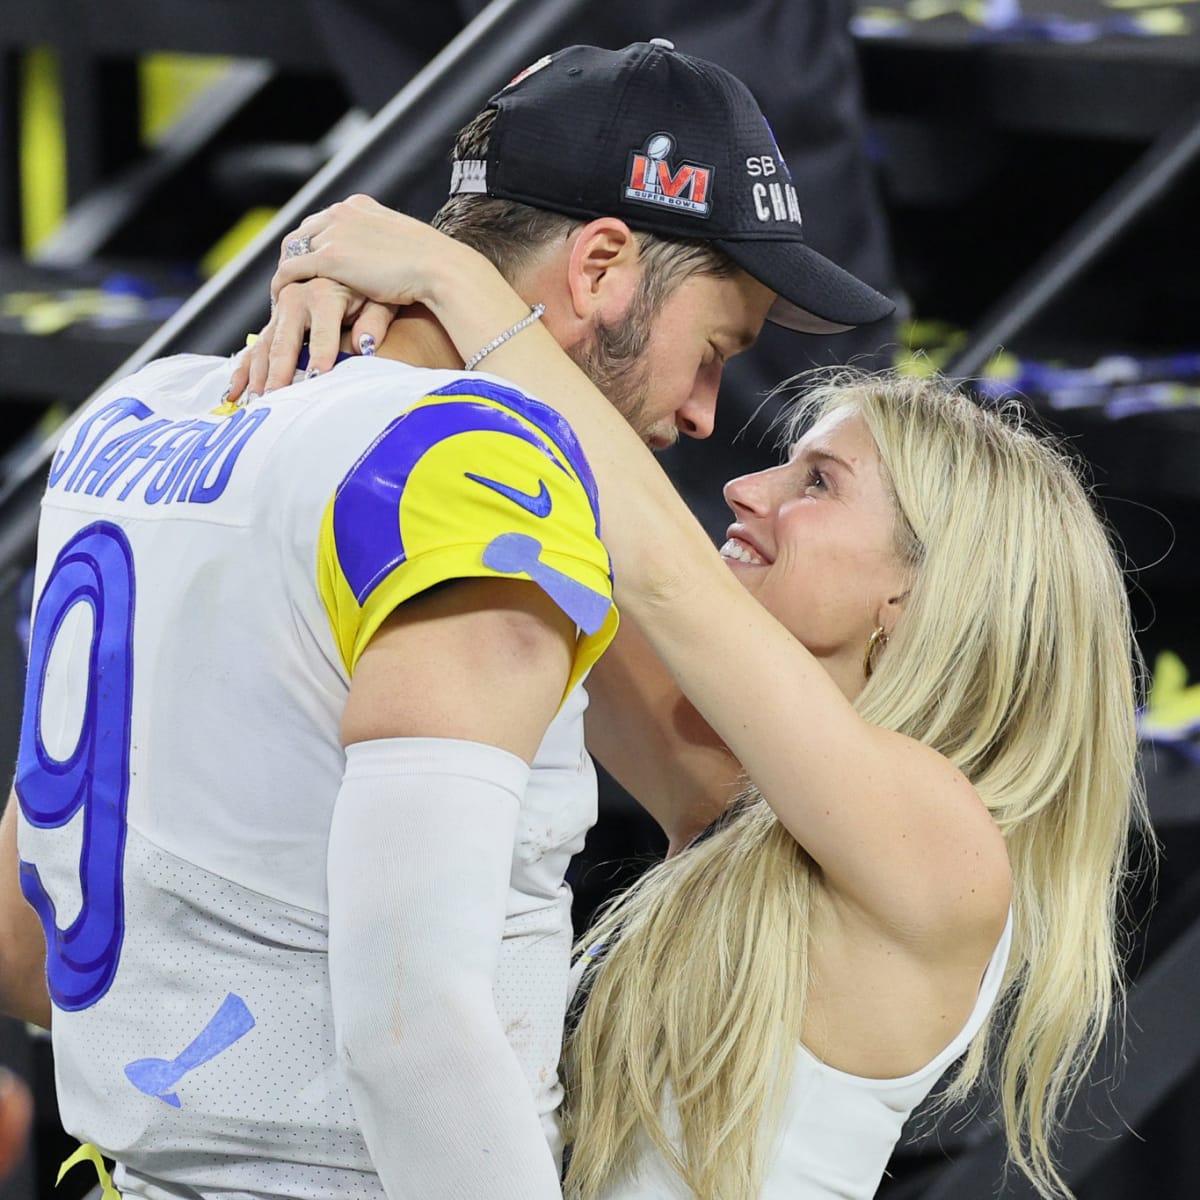 Kelly Stafford Shares Racy Photo In Response To Matthew's First Instagram  Post - The Spun: What's Trending In The Sports World Today